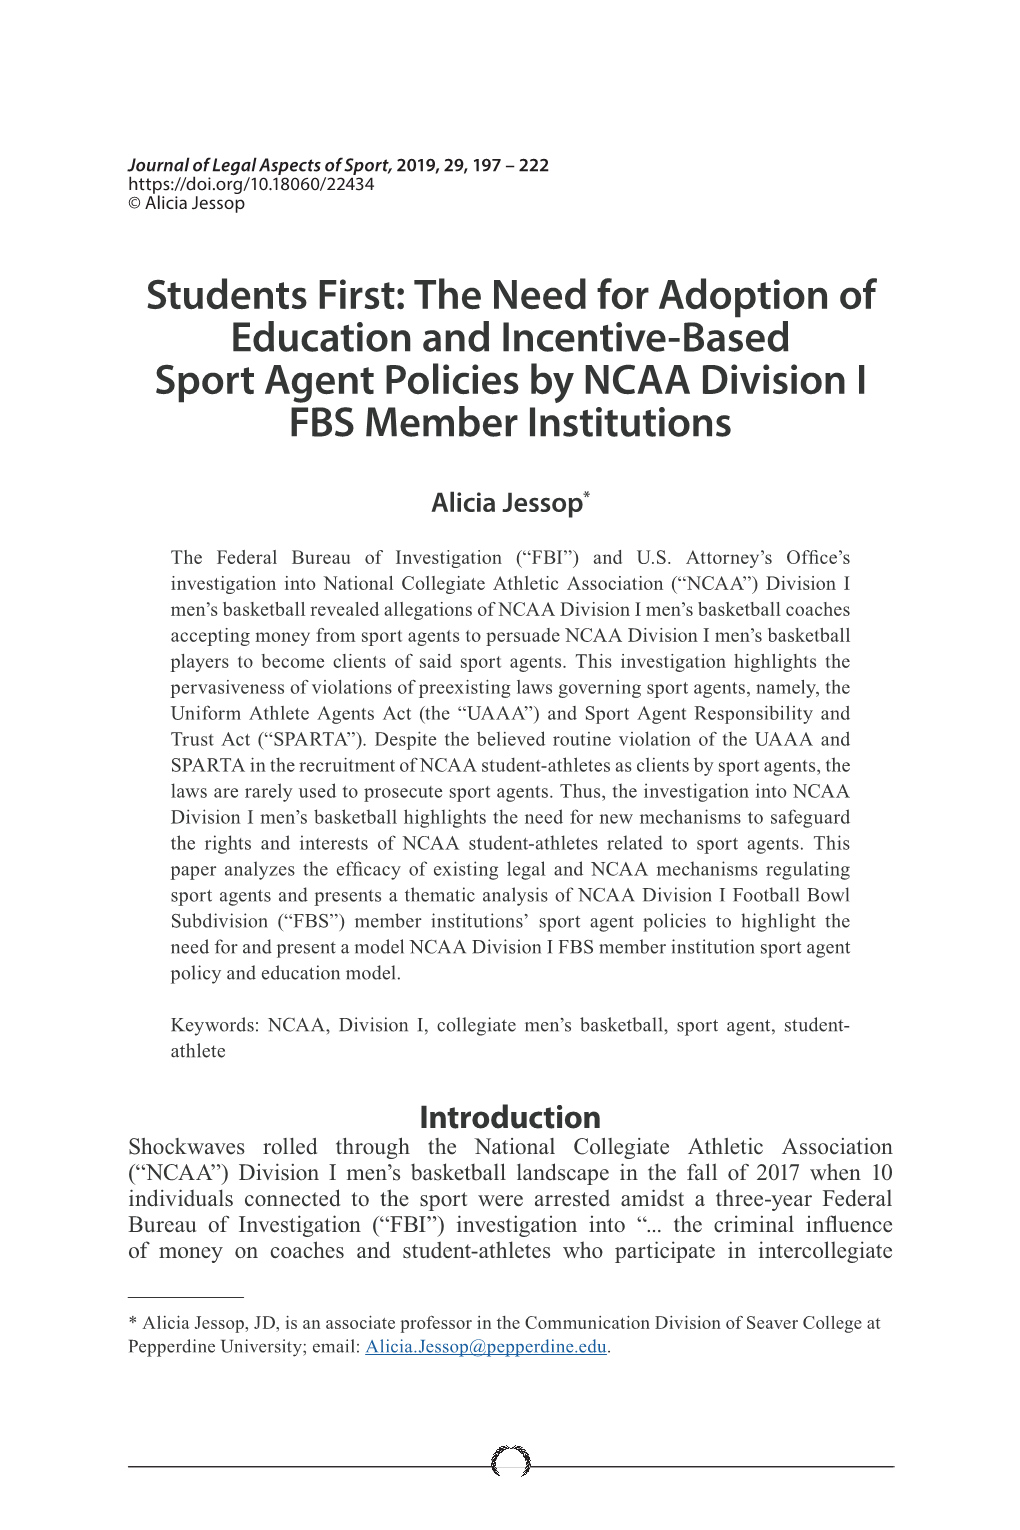 The Need for Adoption of Education and Incentive-Based Sport Agent Policies by NCAA Division I FBS Member Institutions